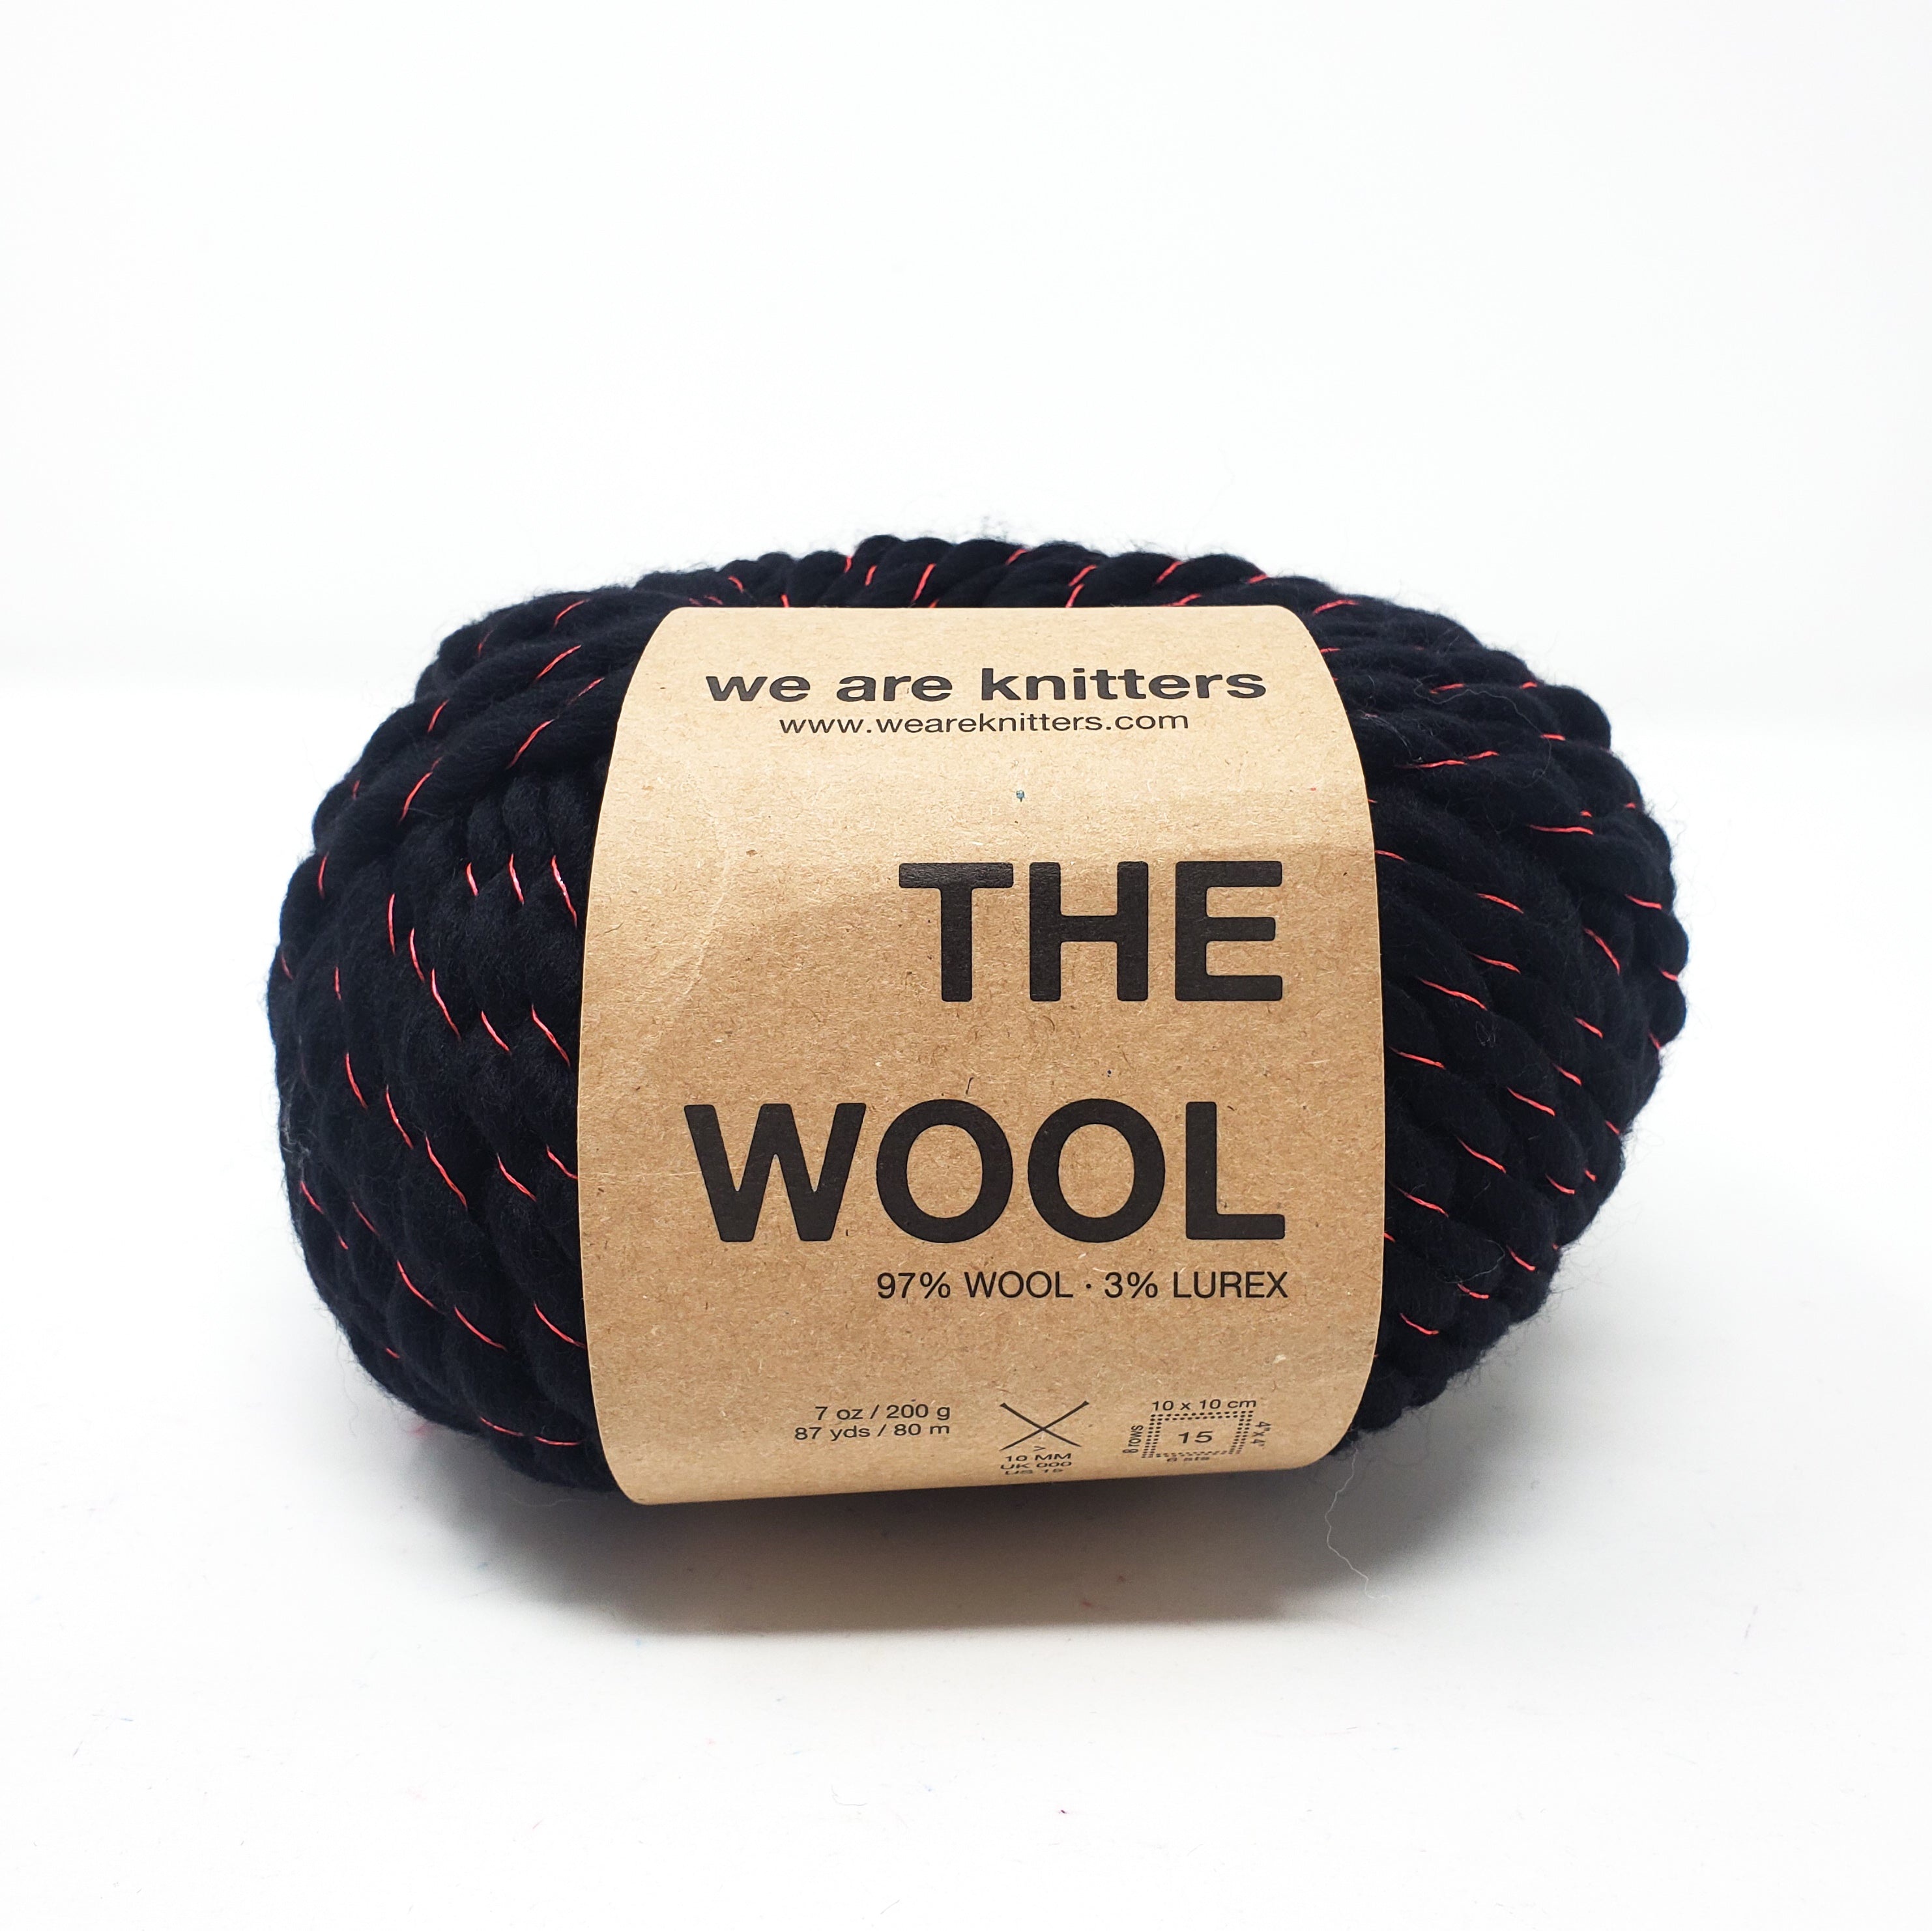 The Wool